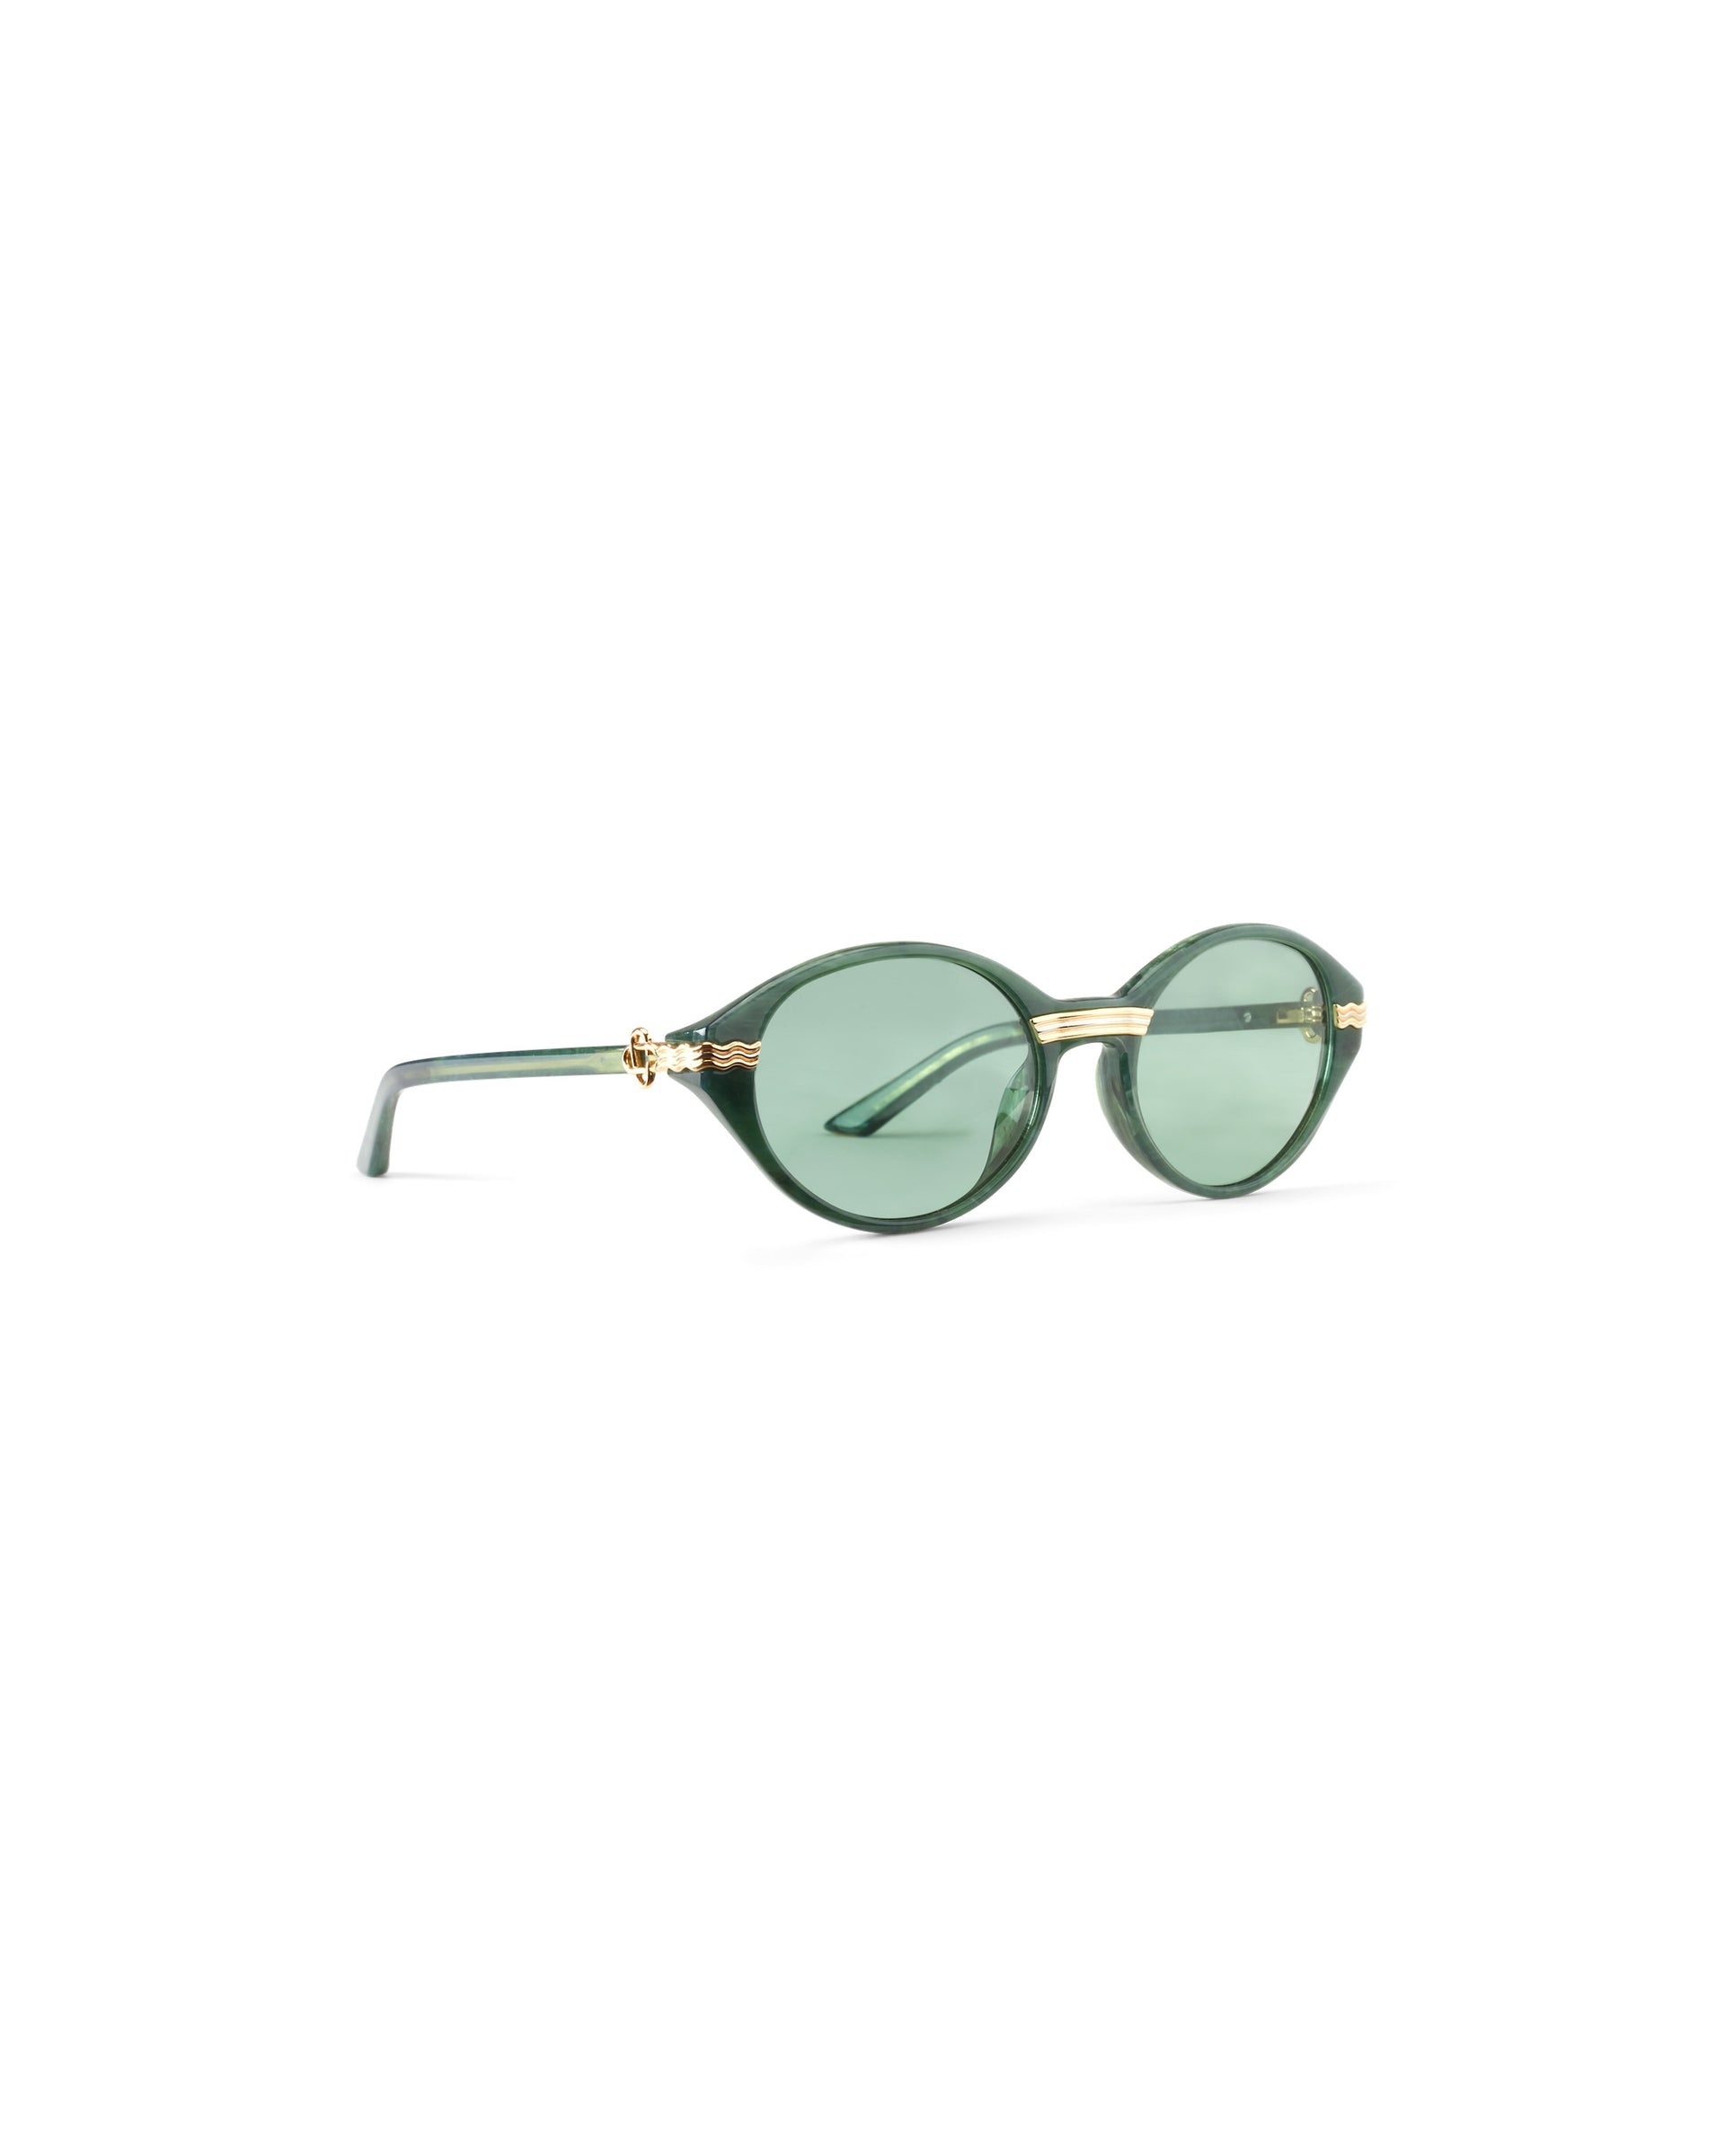 Green & Gold Cannes Sunglasses - 1